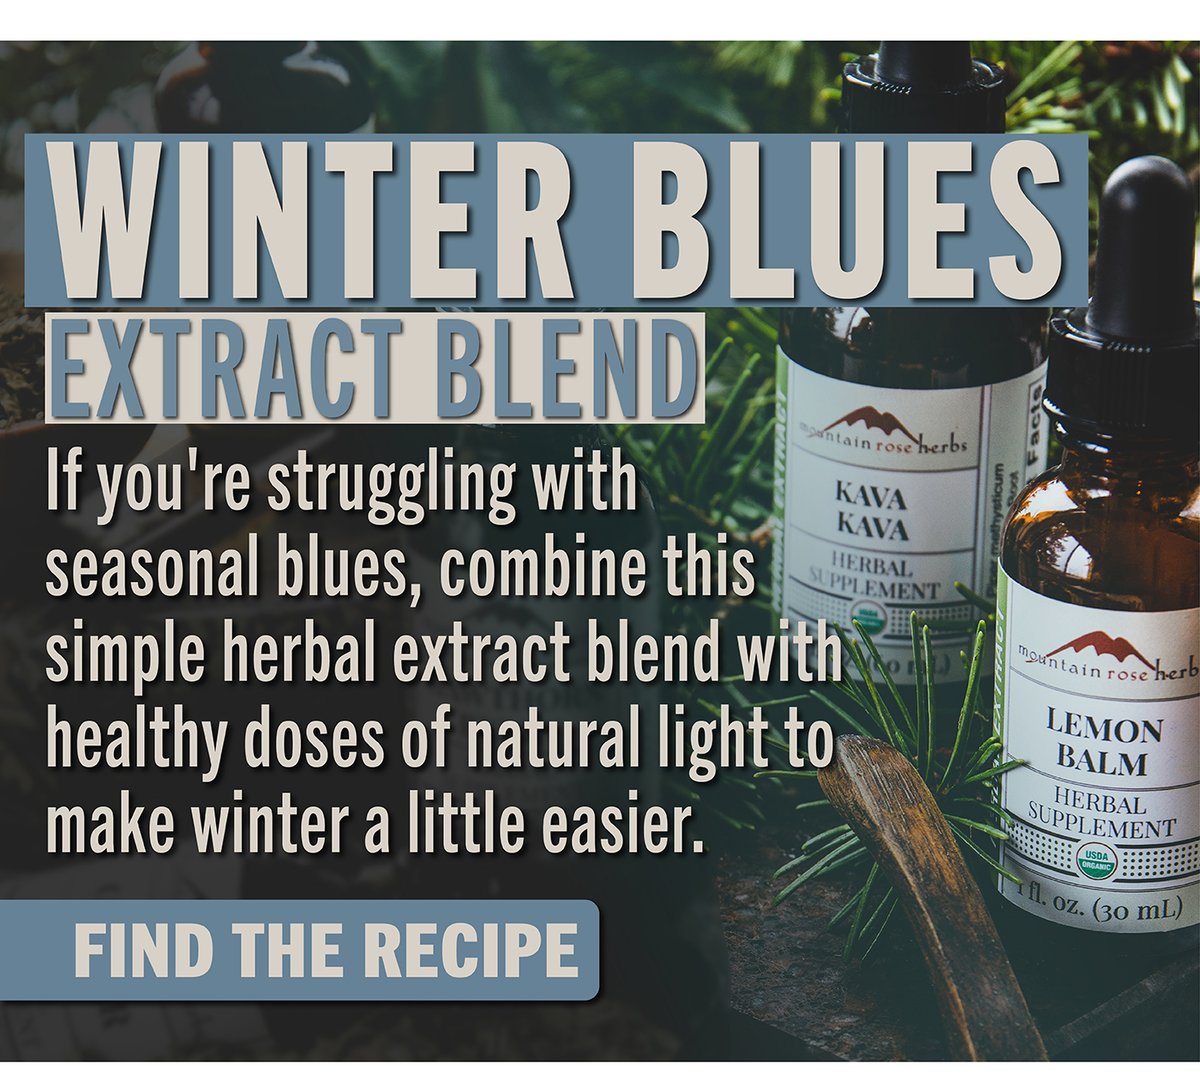 Winter Blues Extract Blend